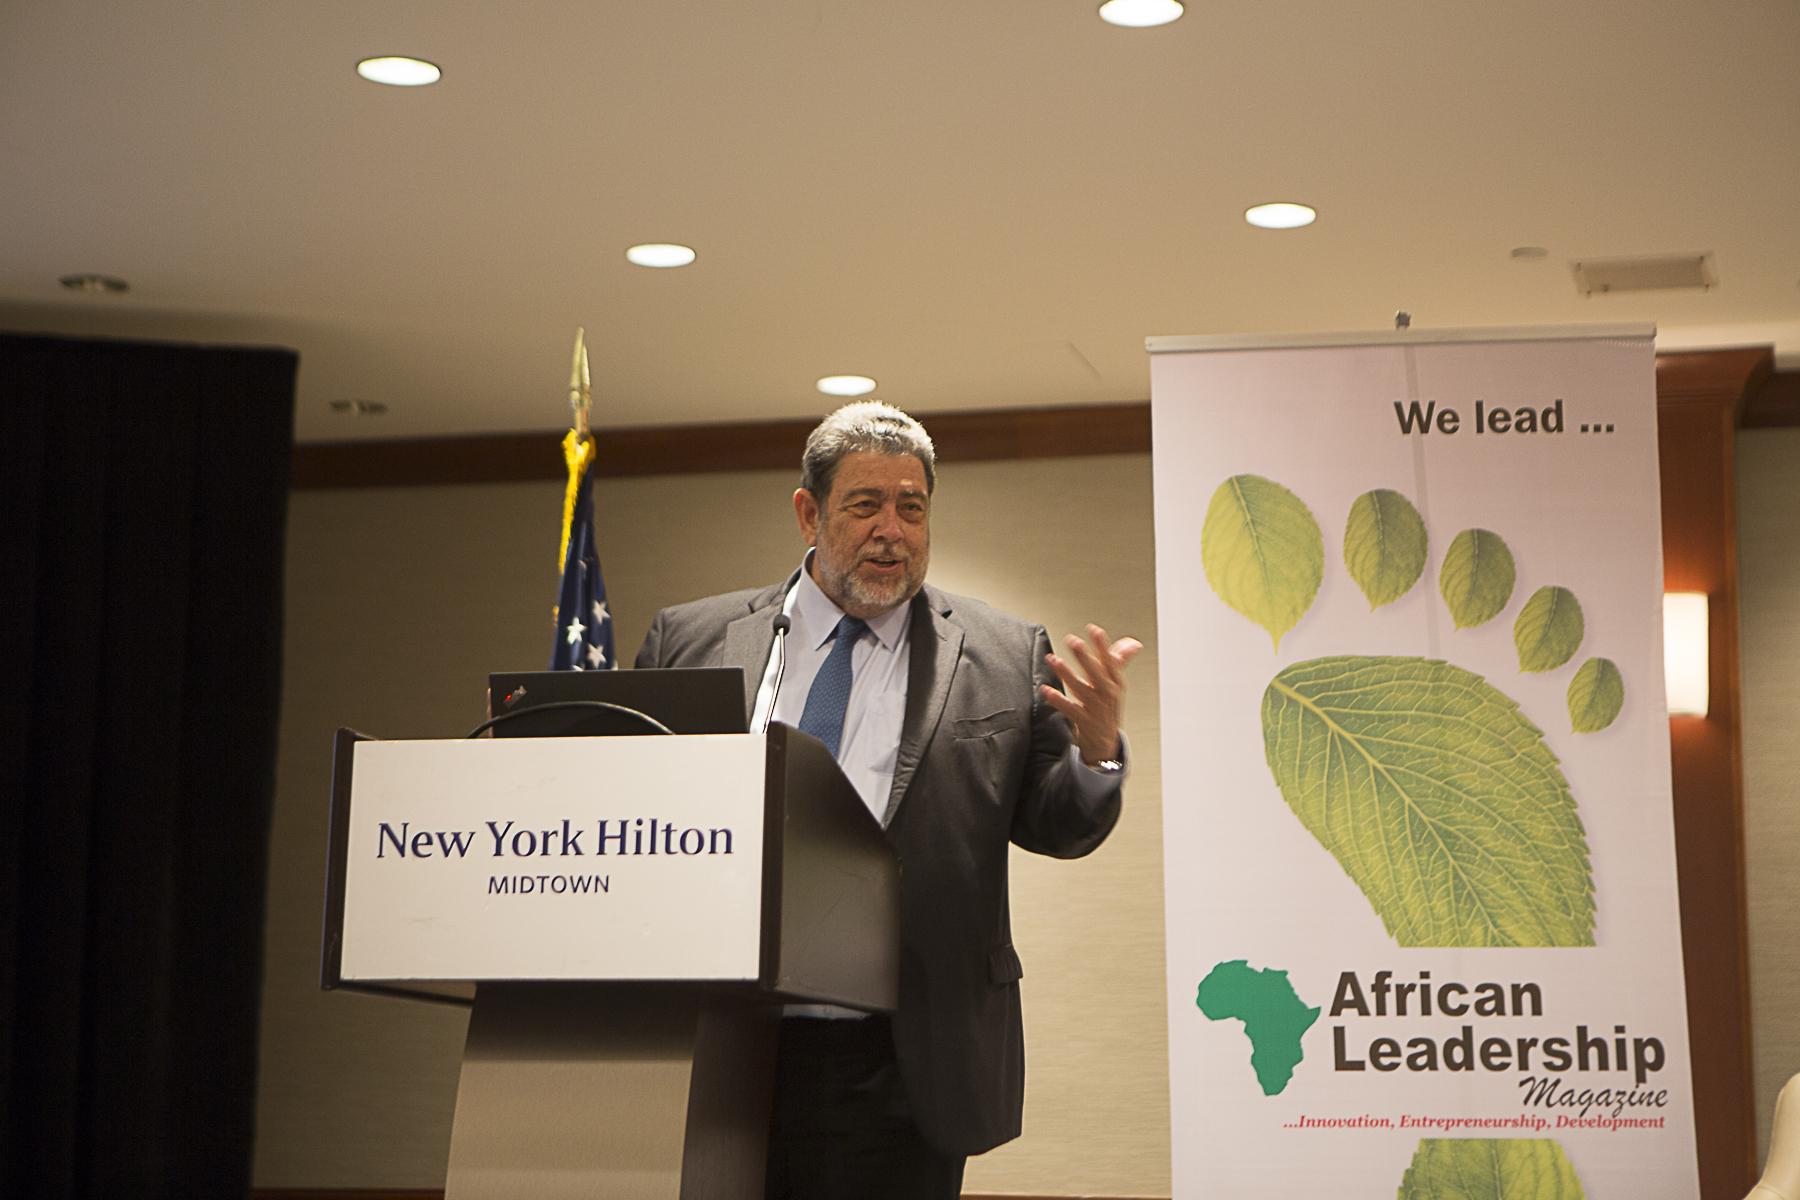 10 Takeaways from Prime Minister Gonsalves’ Speech at The International Forum on African Leadership 2018